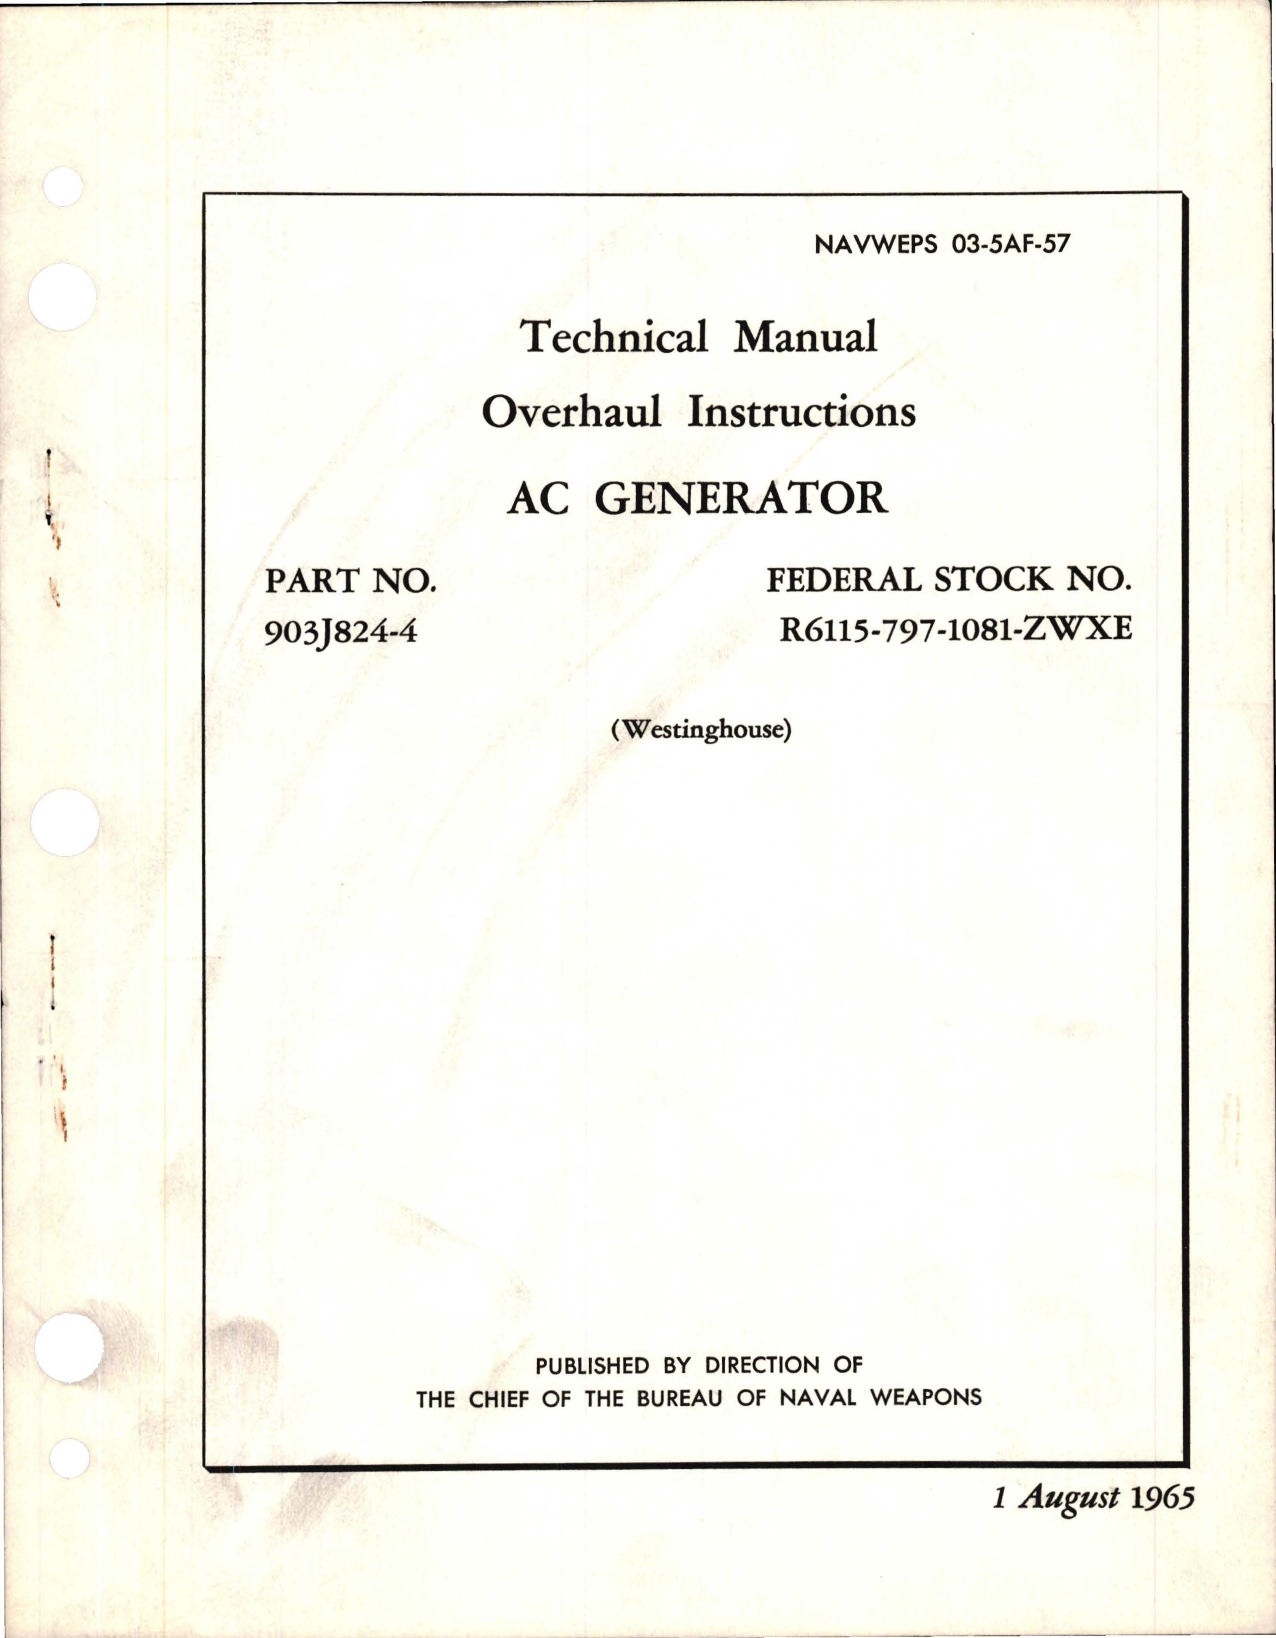 Sample page 1 from AirCorps Library document: Overhaul Instructions for AC Generator - Part 903J824-4